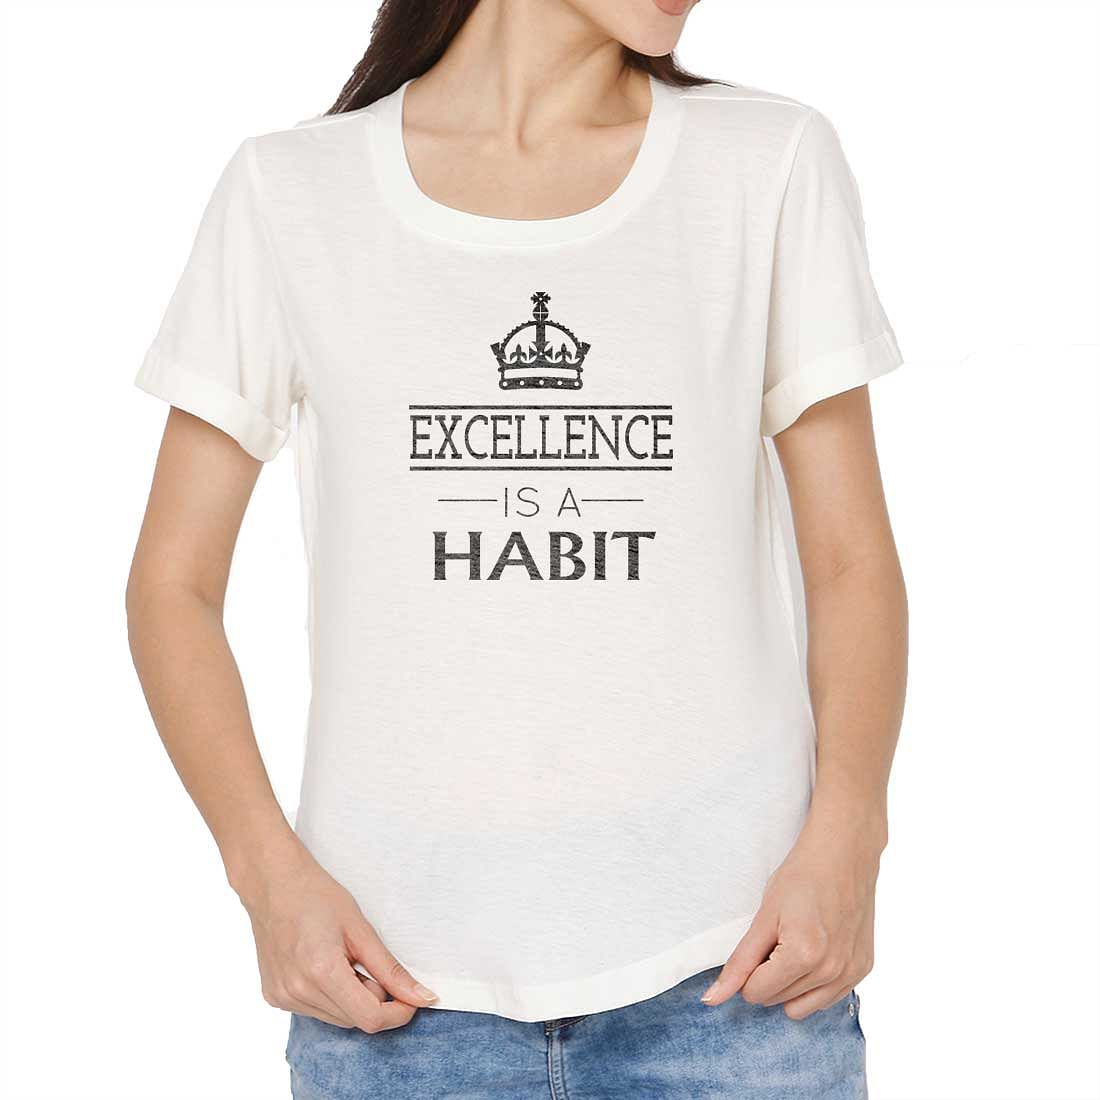 Workout T Shirts For Women Girls Tees - Excellence Is A Habit